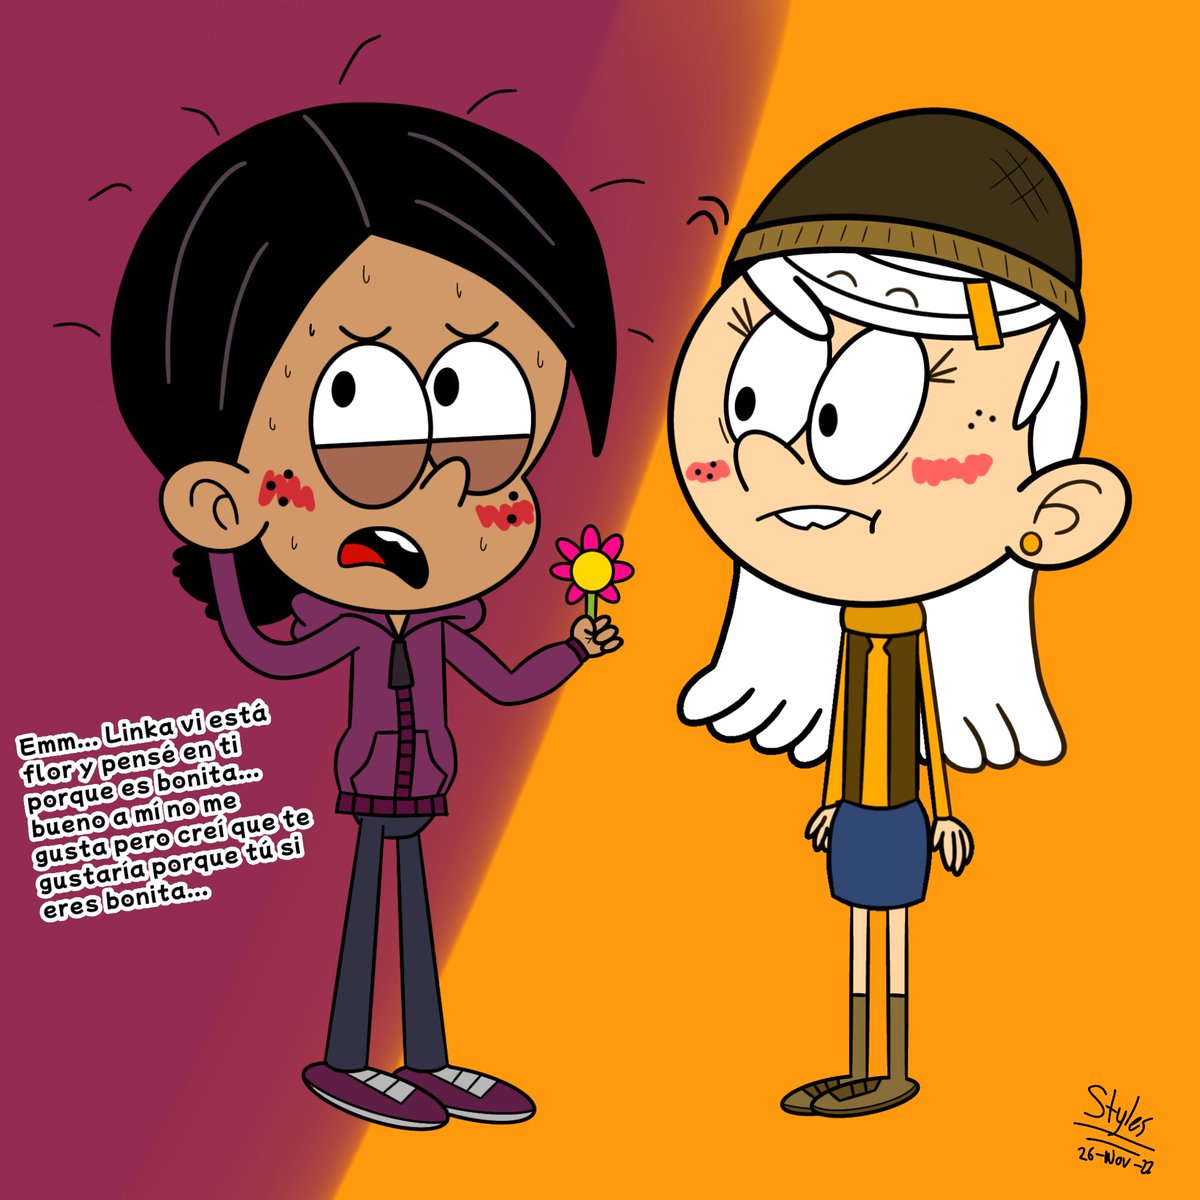 Ay el joven amor. 💘💘
#TheLoudHouse #TheLoudHousefanart #TLH #Nickelodeon #LinkaLoud #RonSantiago #RonnieColn #Ronniecoln